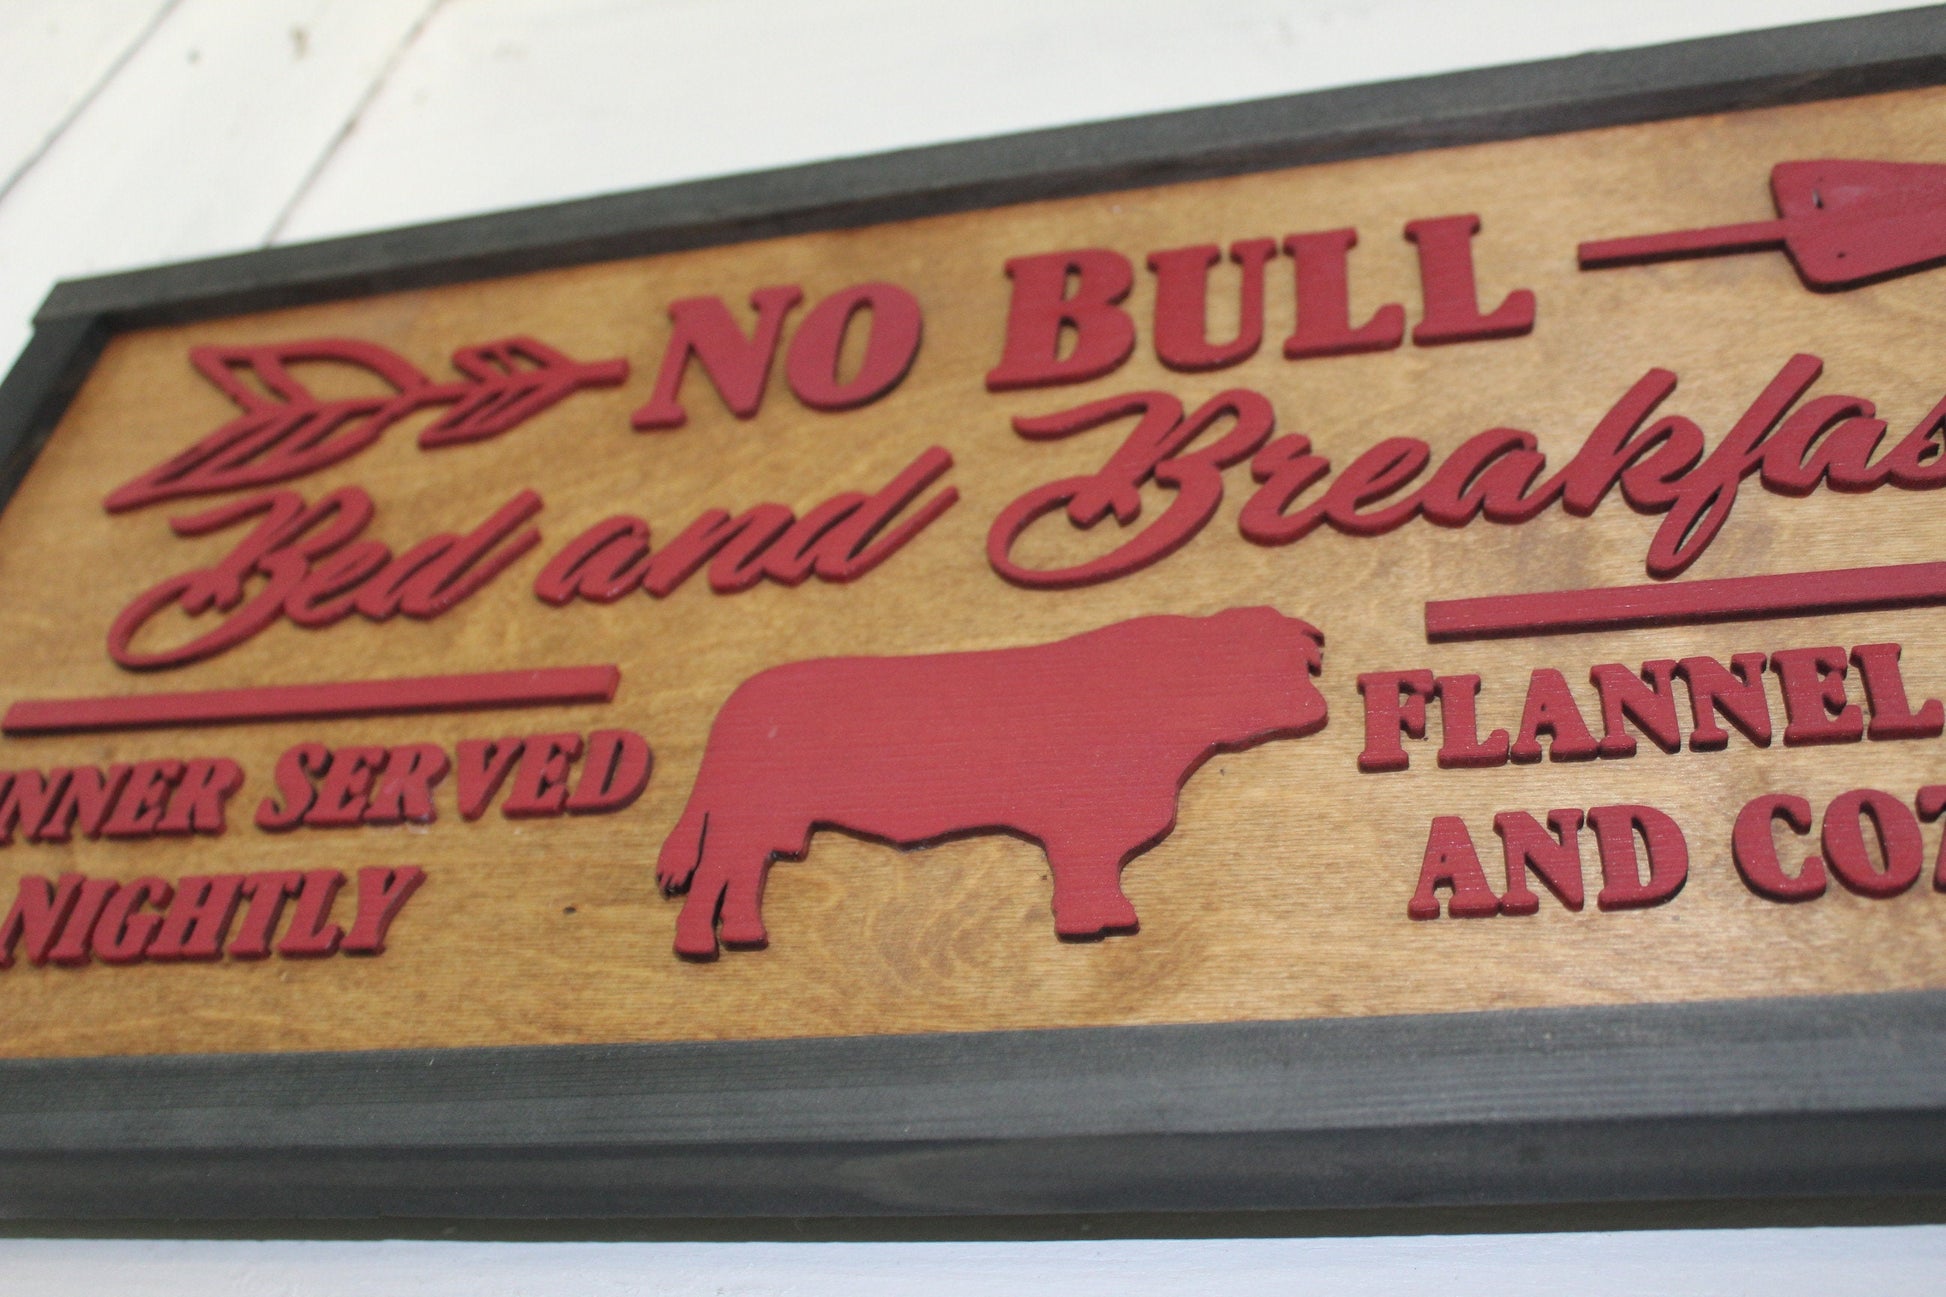 No Bull Bed and Breakfast Wood Sign 3D Raised Farmhouse Rustic Primitive Framed Barn Sign Dinner Served Nightly Flannel Sheets Cozy Beds Cow